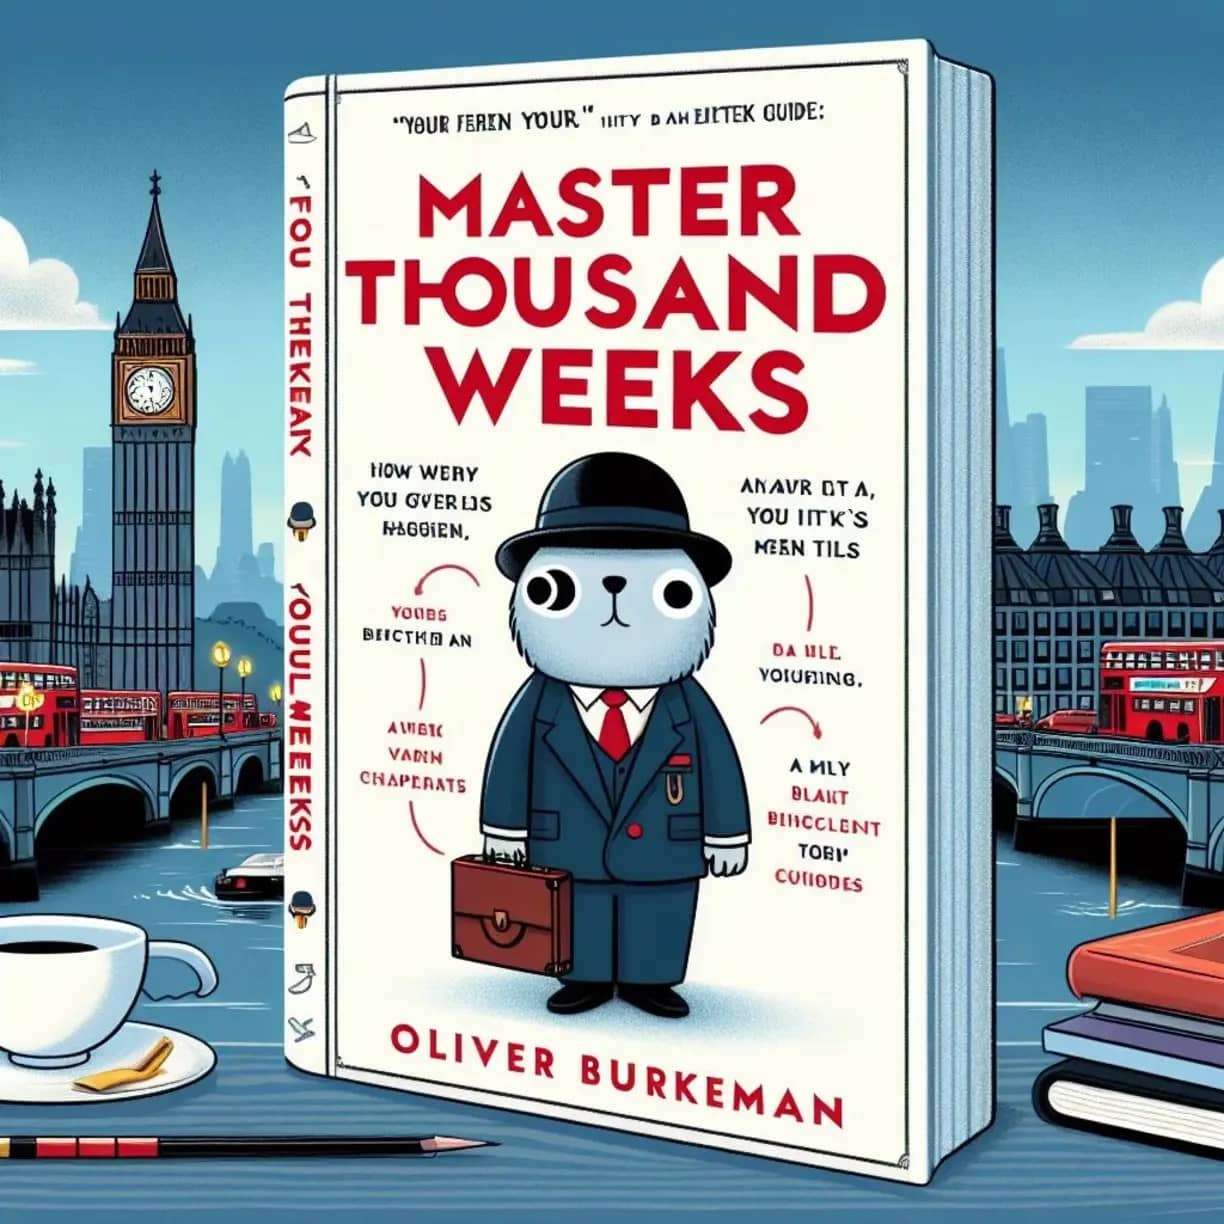 Master Your 4,000 Weeks: A Bite-Sized Guide to "Four Thousand Weeks" by Oliver Burkeman